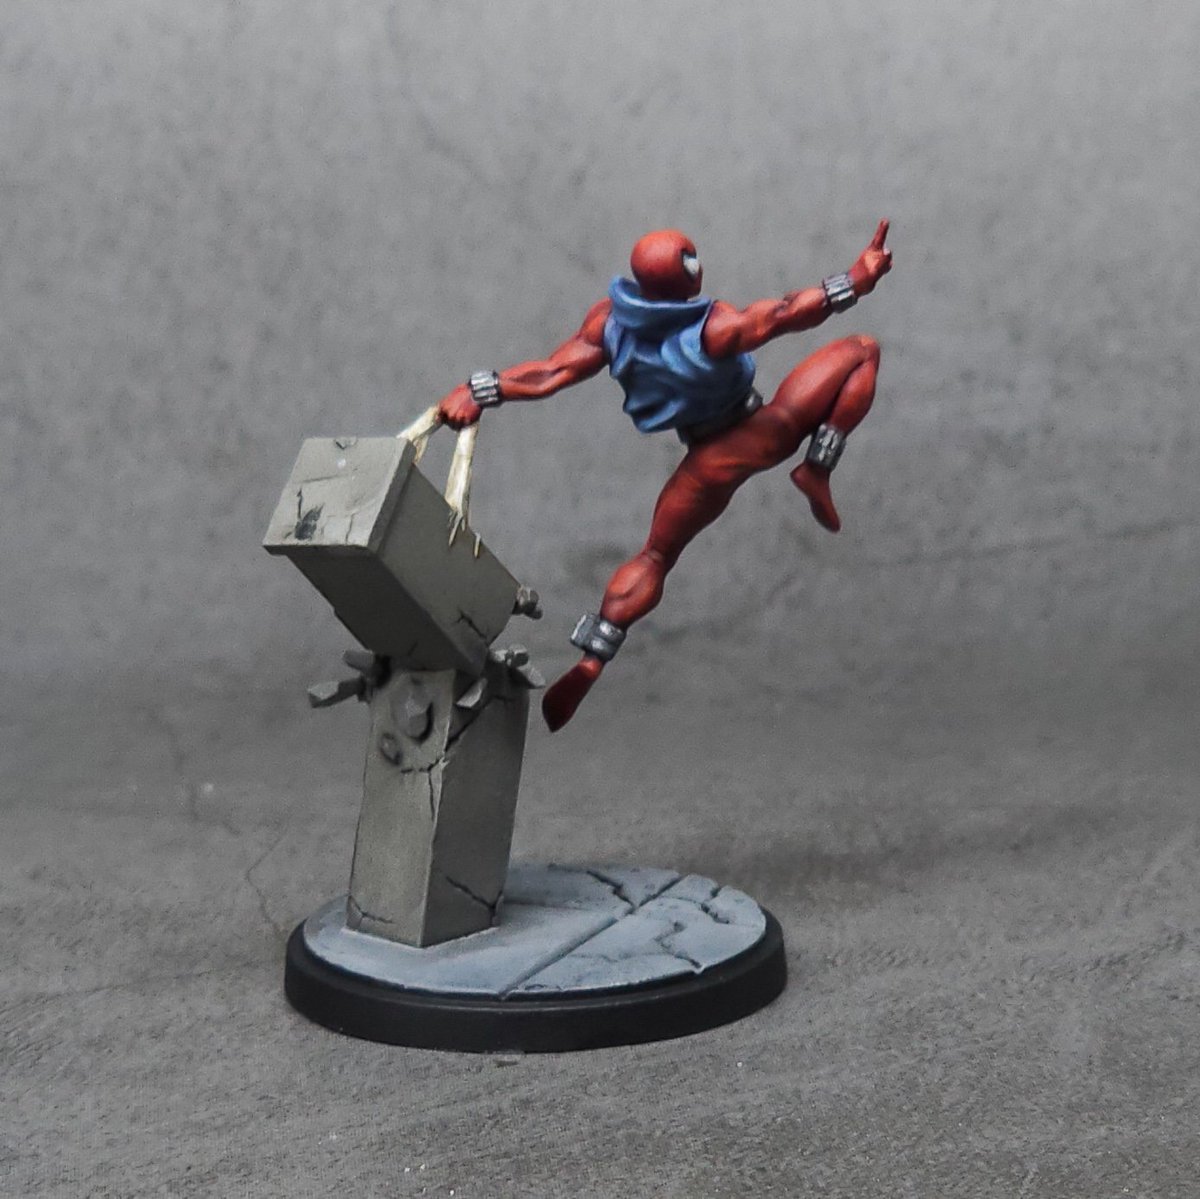 Spider-May continues with Scarlet Spider all wrapped up.

Now we need to dip into Spidey's Rogues Gallery...

Thanks @atomicmassgames for sending him! 

#minipainting #marvelcrisisprotocol #mcp #spiderman #marvel